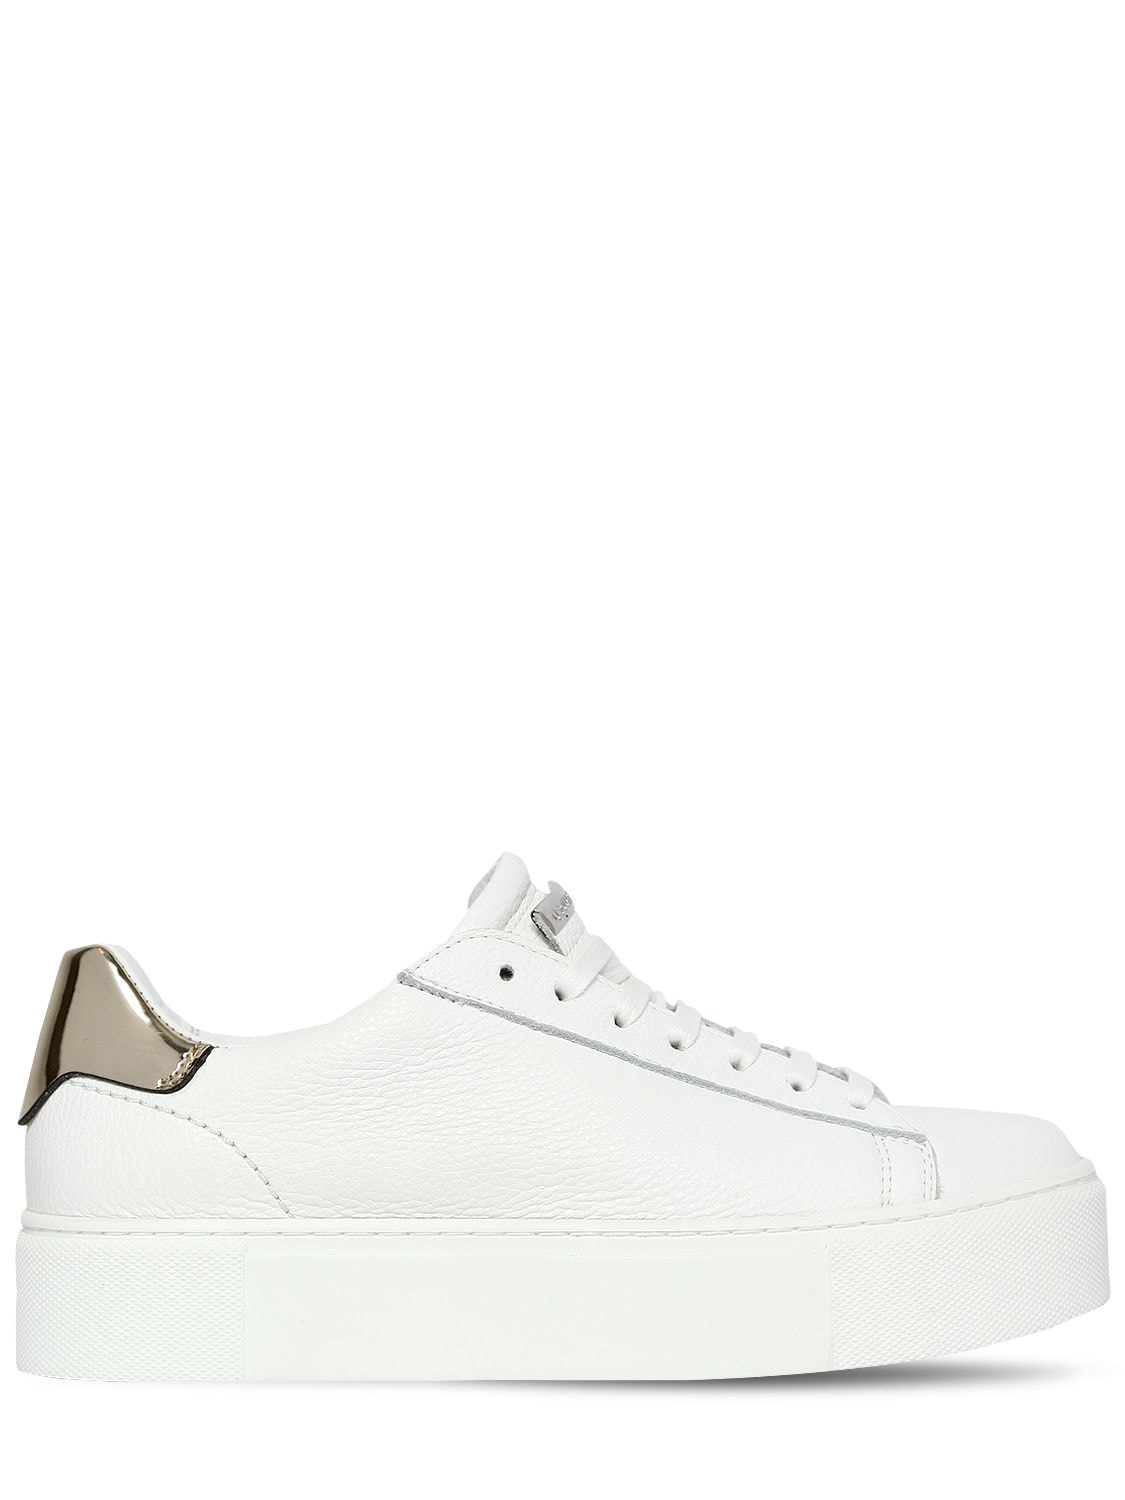 Dsquared2 40mm Tennis Leather Platform Sneakers In White/silver